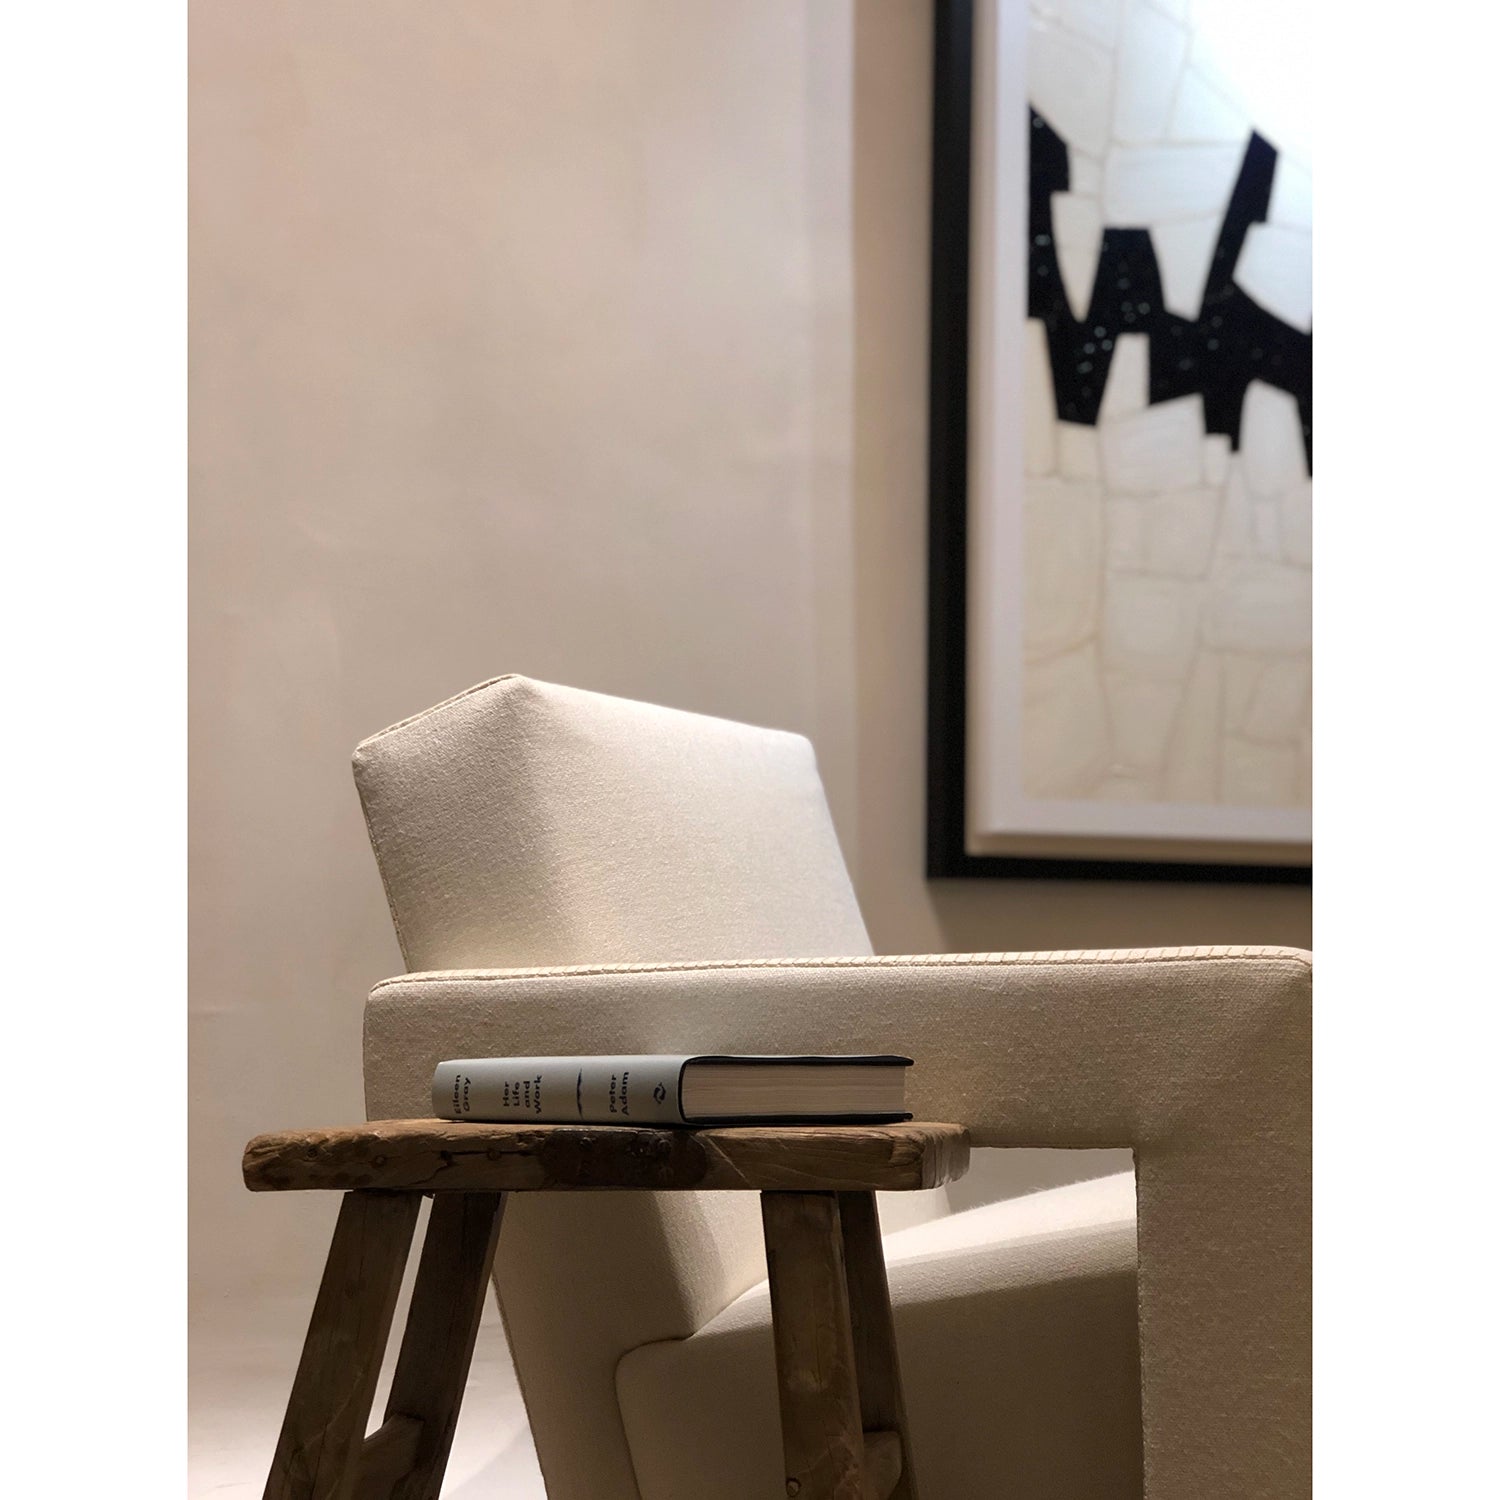 Chair With Poetry Book and Painting